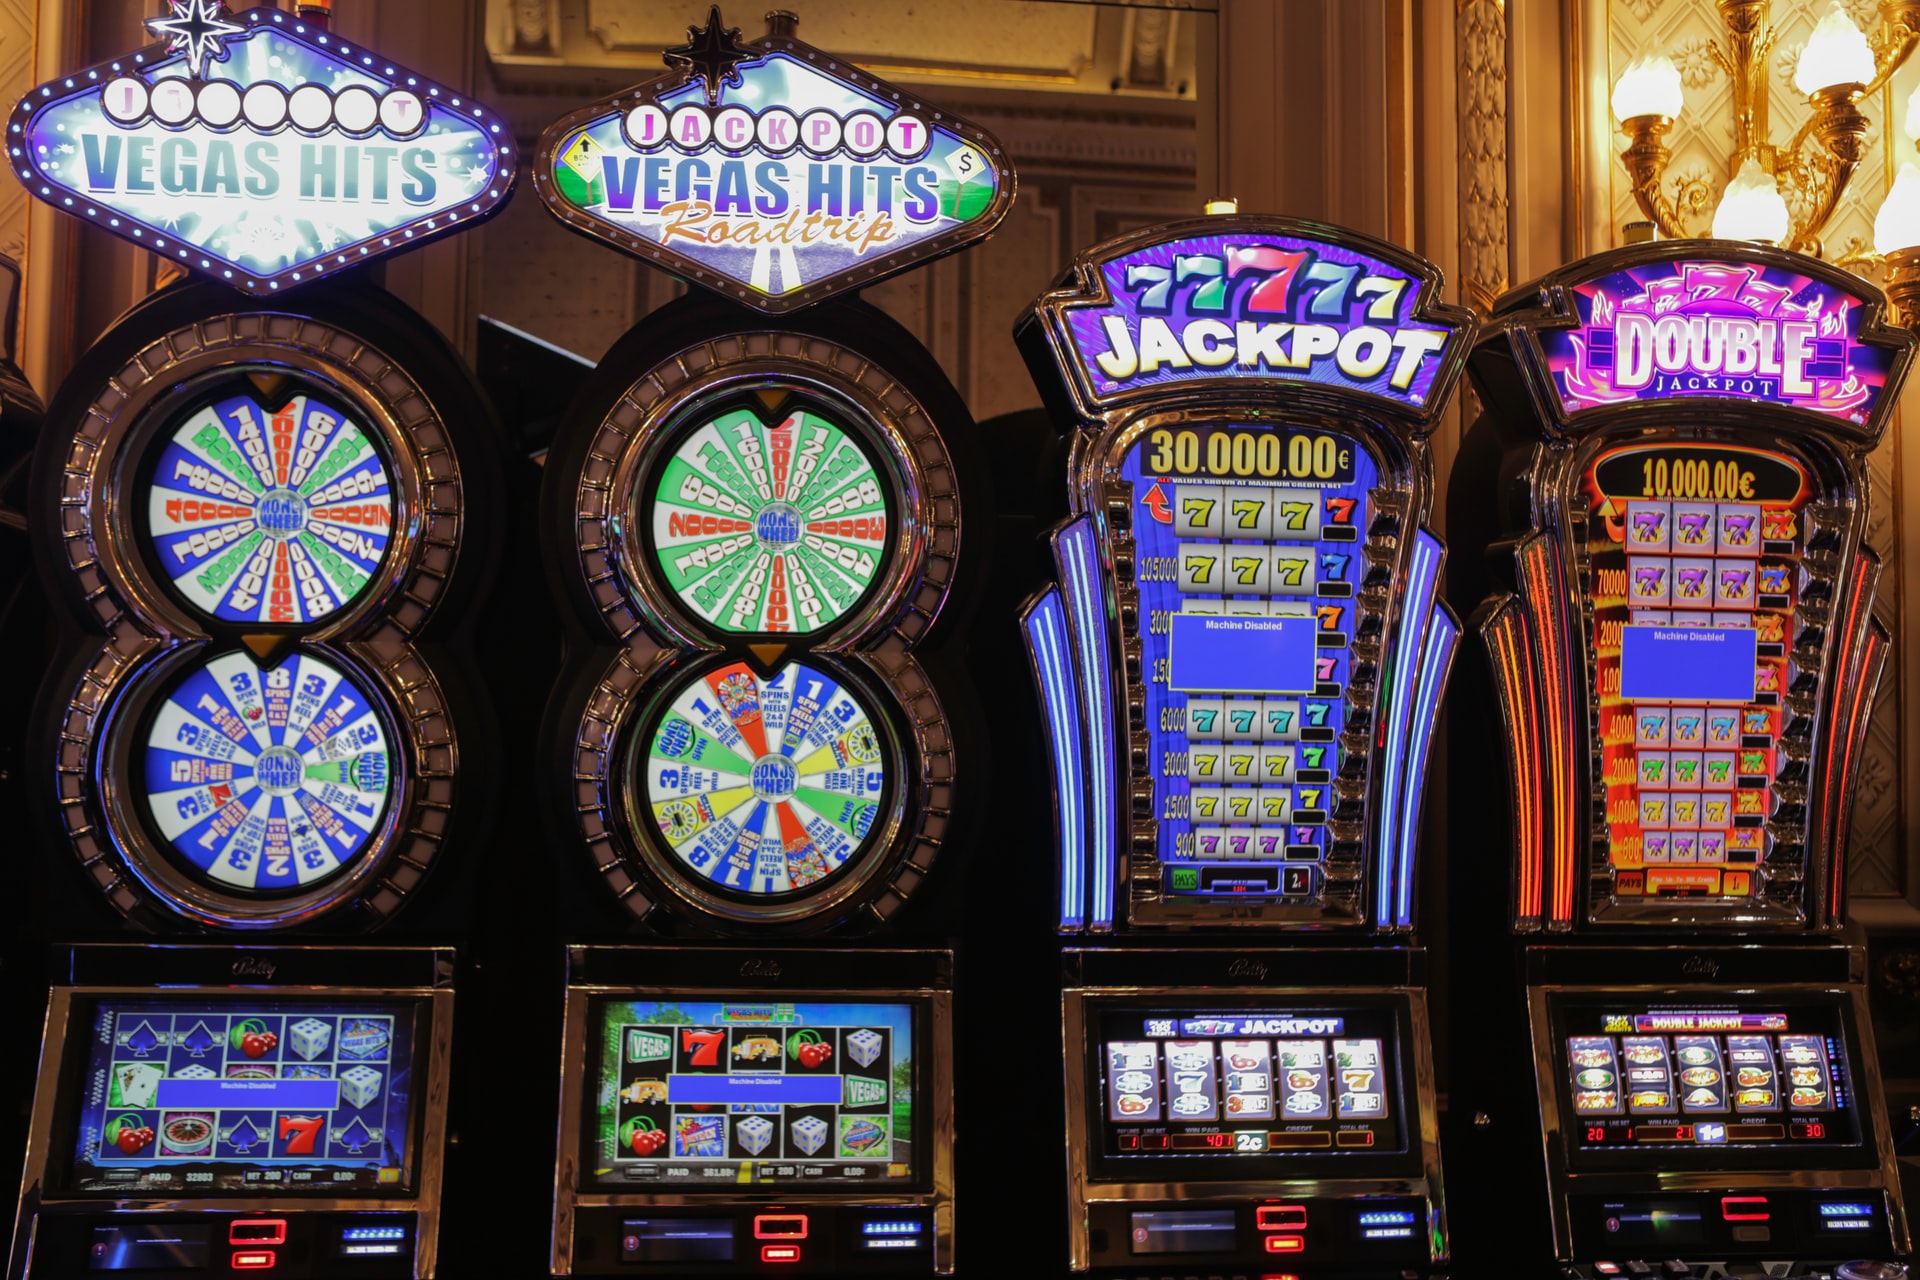 The Story of Alexander Slots Machine